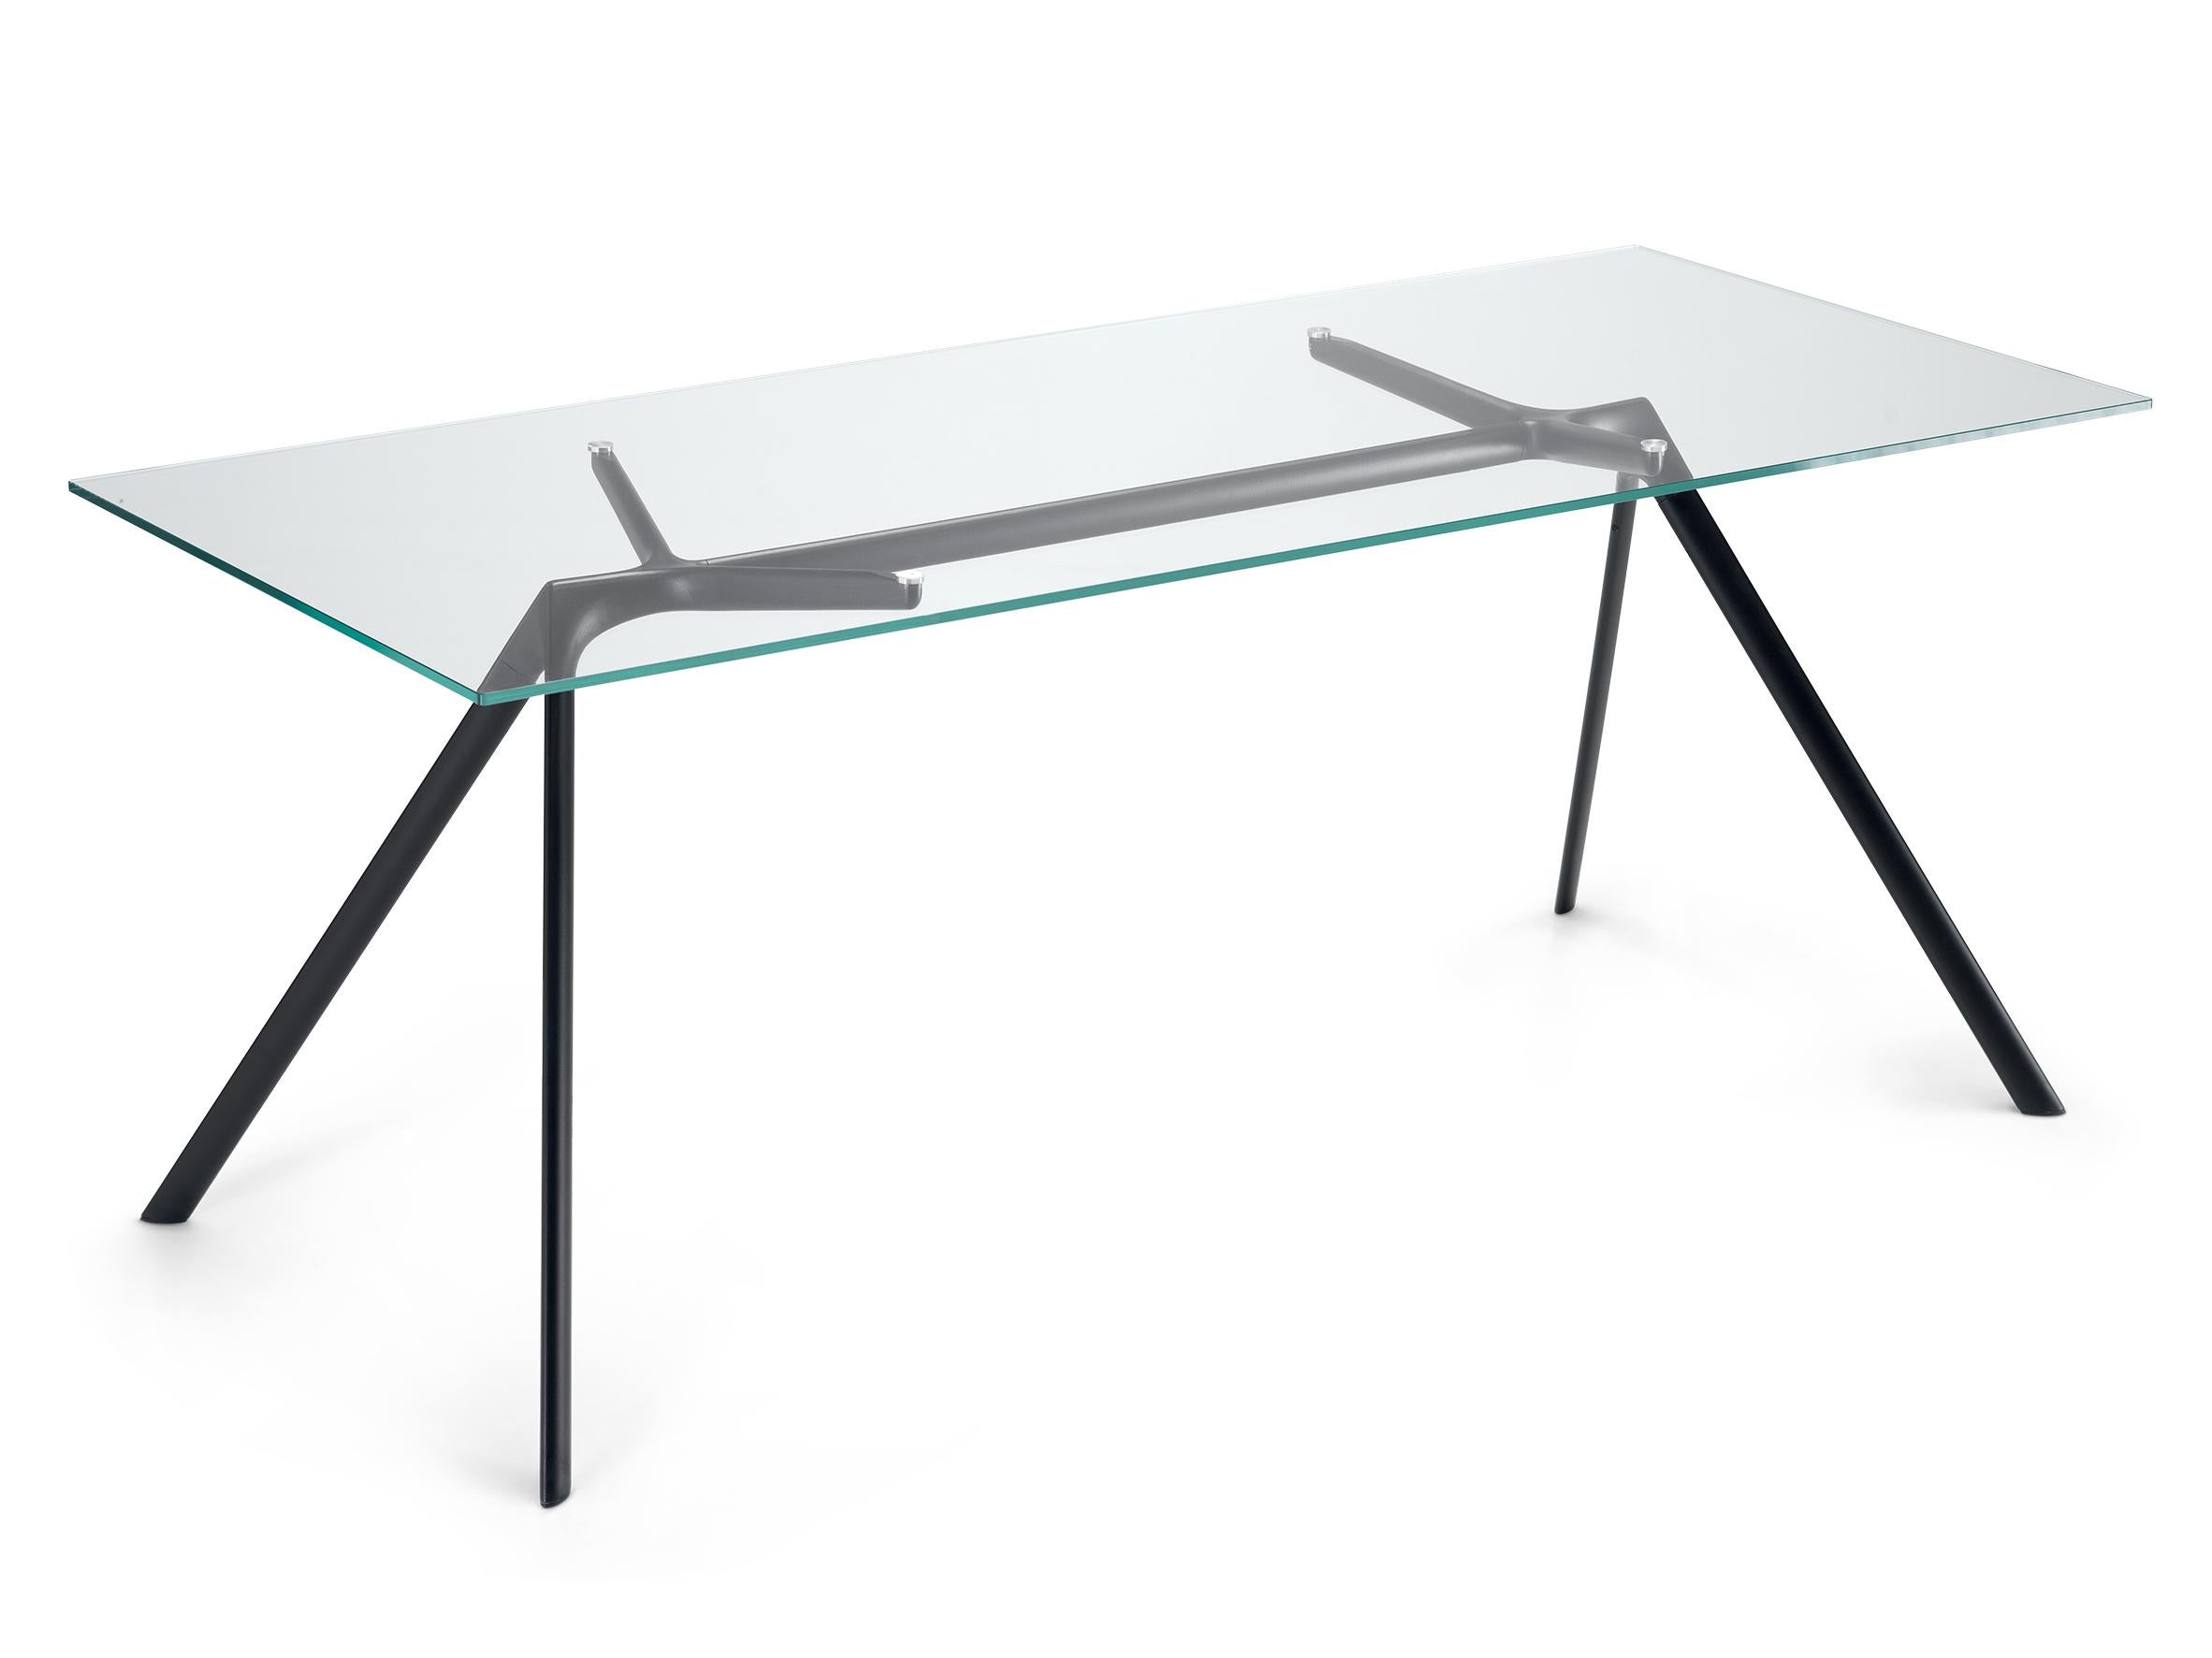 Alias Small Dry 45A Table in Glass Top with Black Lacquered Aluminium Frame by Alberto Meda

Table with structure made of lacquered aluminium elements. Top in extra light tempered glass, thickness 10 mm. Available with predisposition for cable